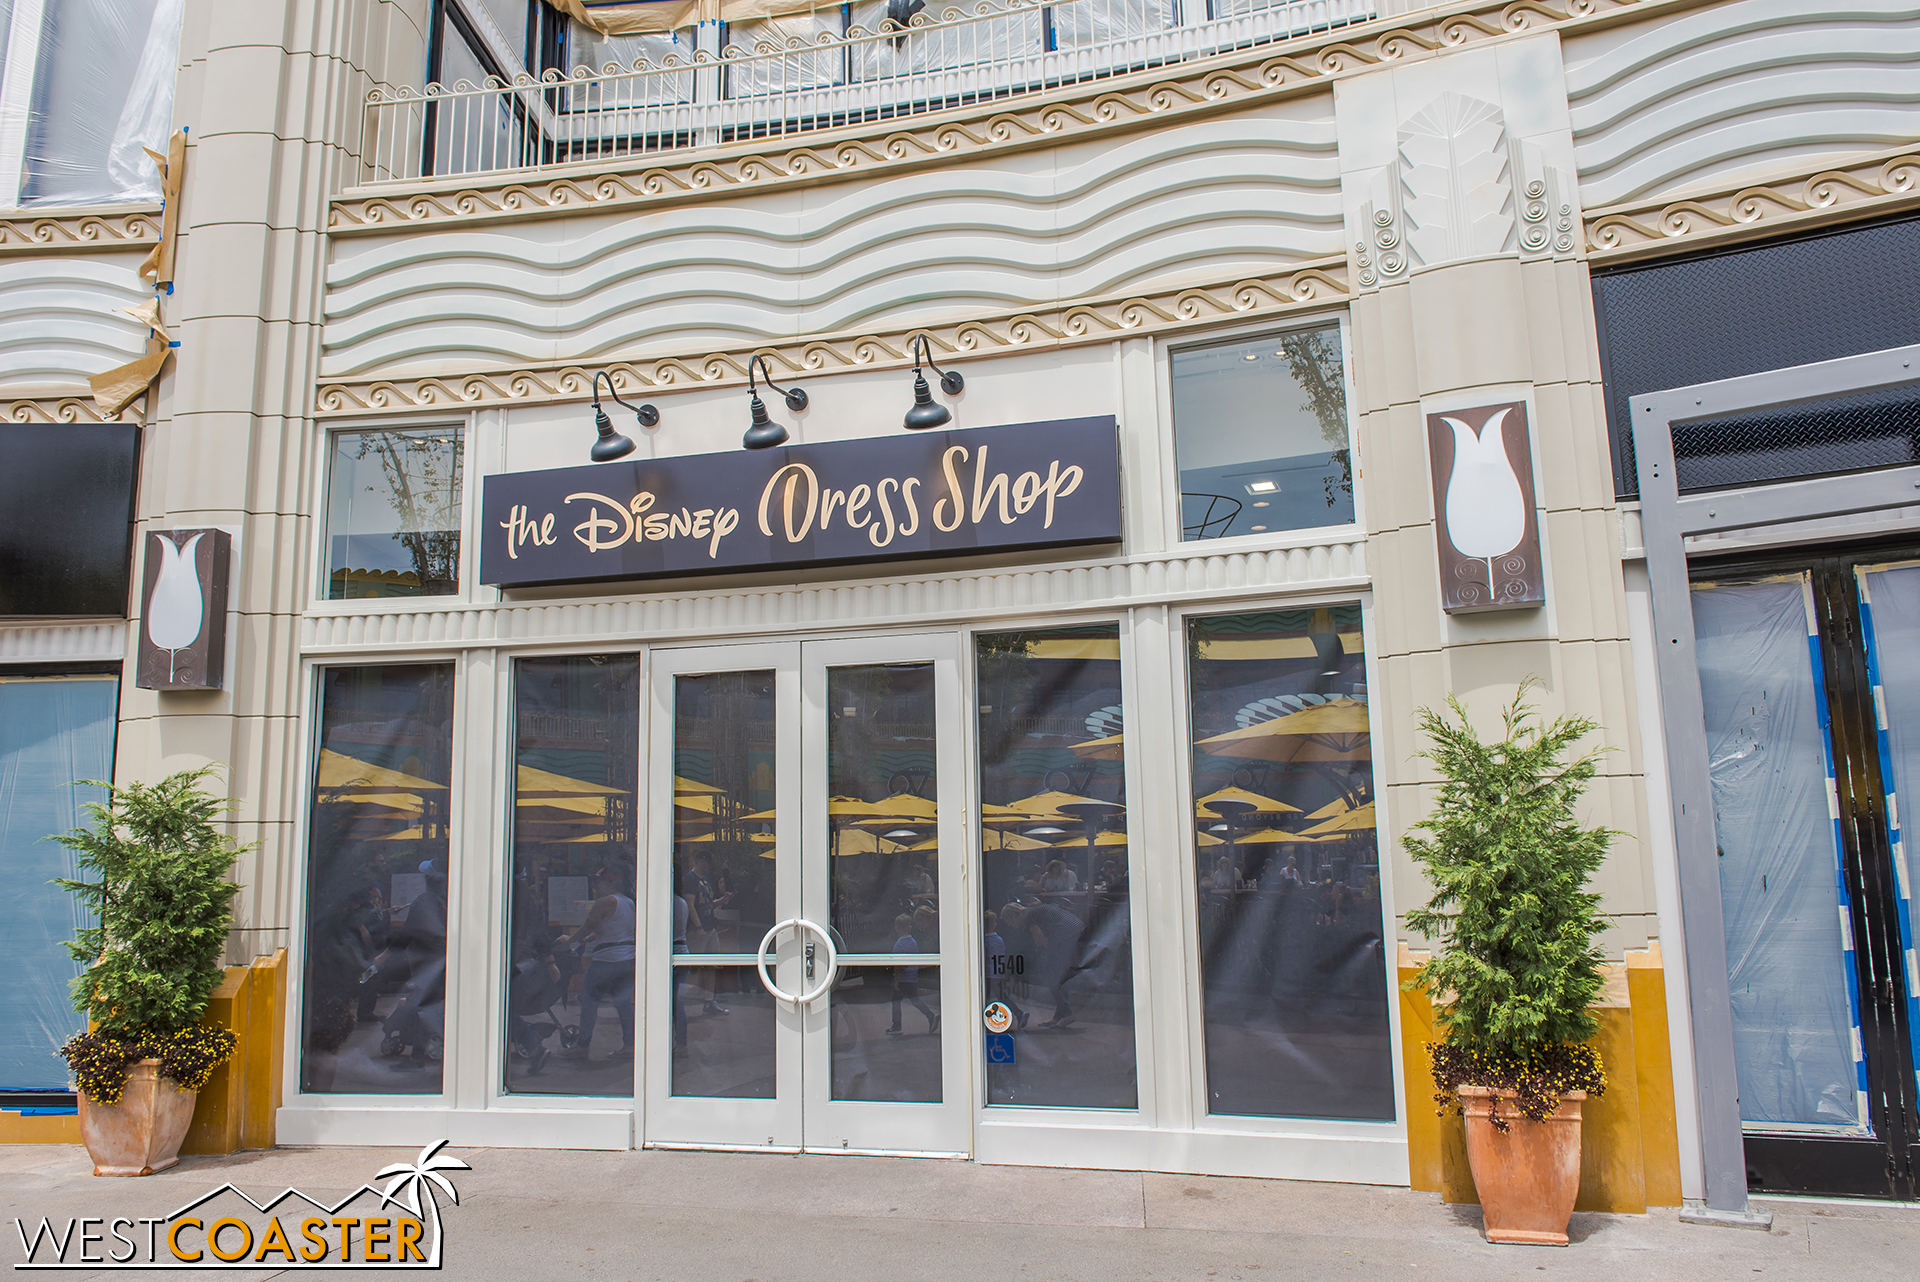  On Friday, the Disney Dress Store was open.&nbsp; By Sunday, it was closed. 